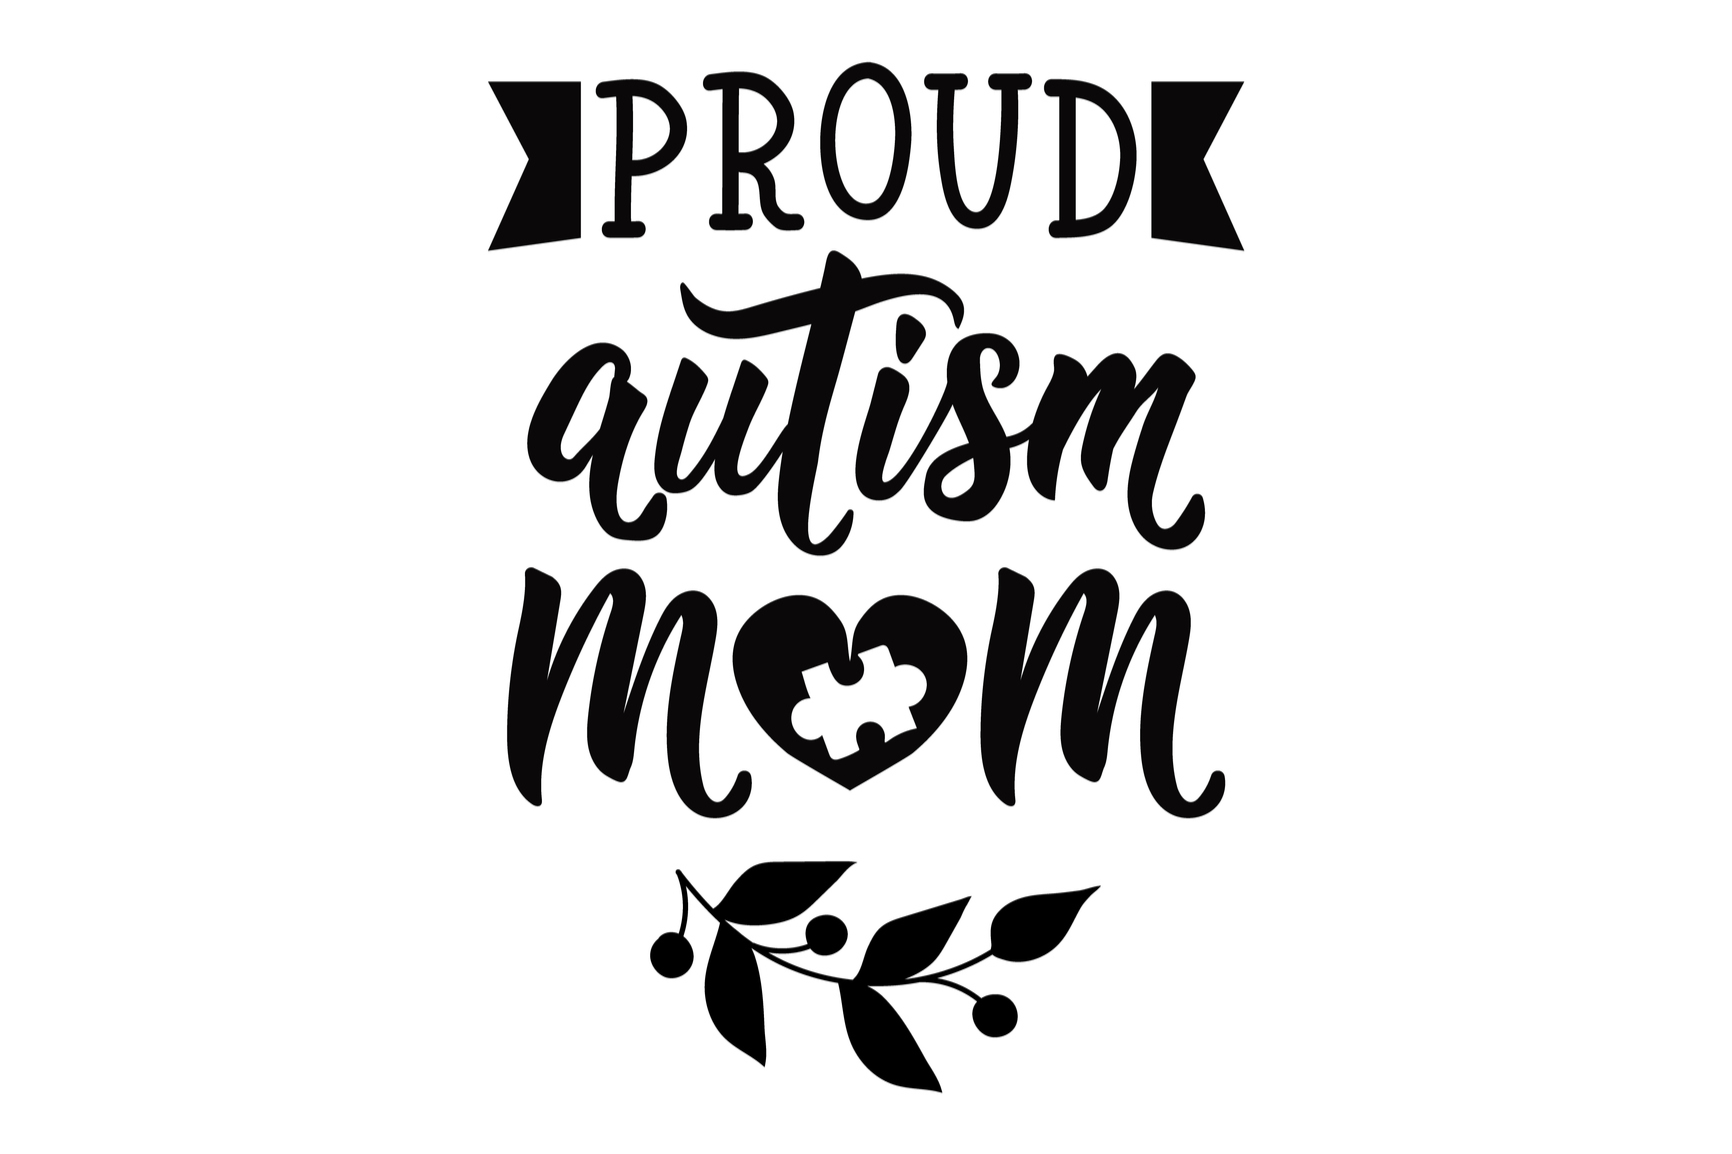 Proud to be autistic mom